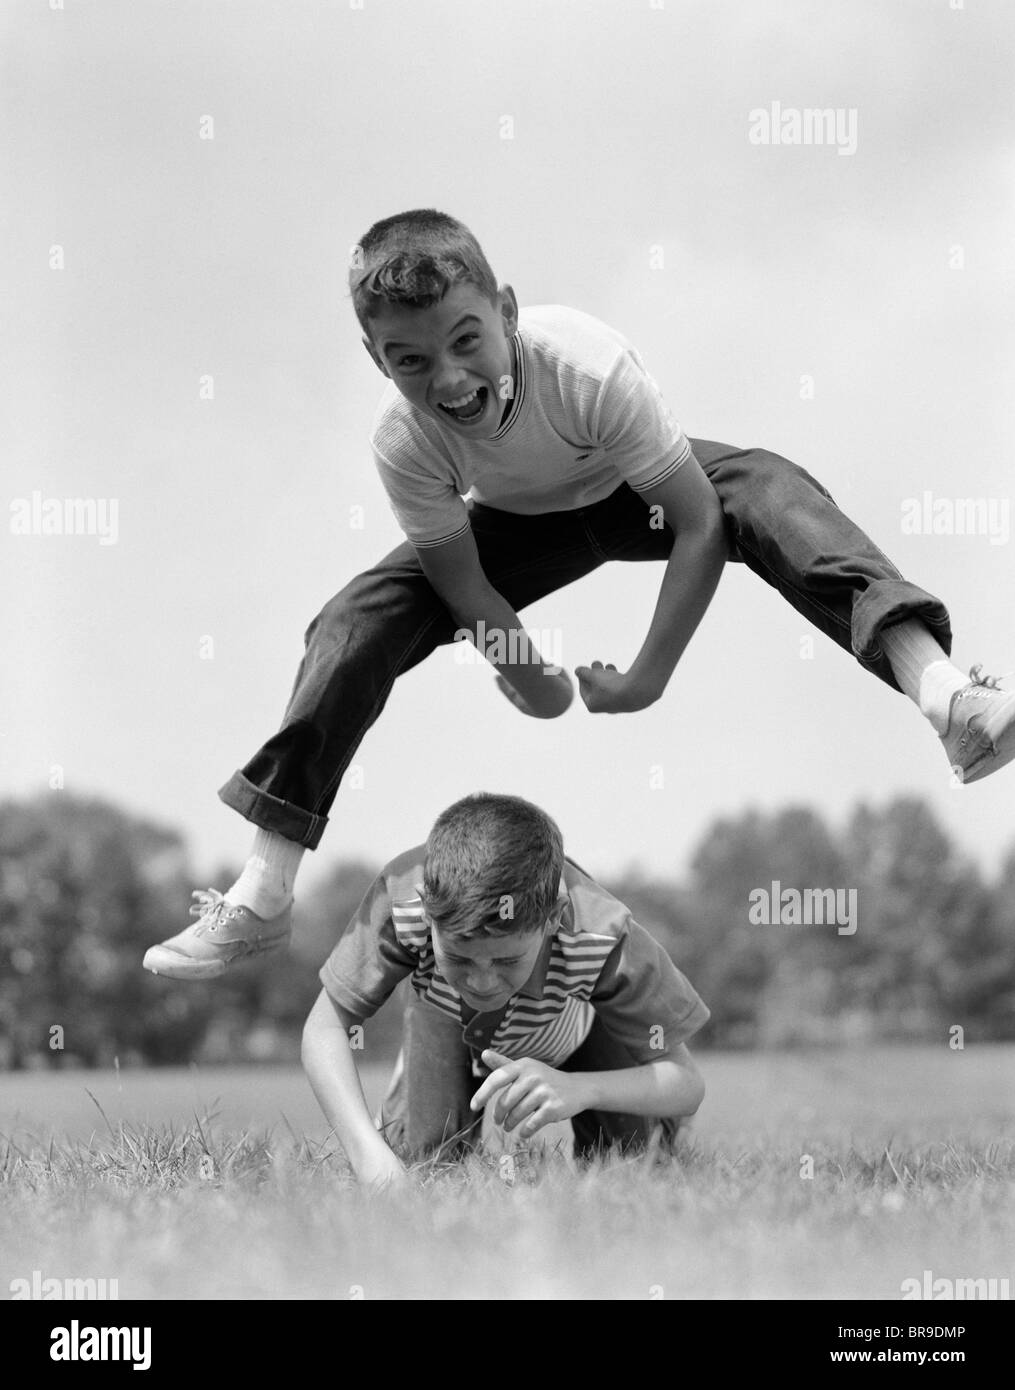 1960s BOYS PLAYING LEAP FROG OUTSIDE SKY GRASS JUMP JUMPING CROUCHING Stock Photo